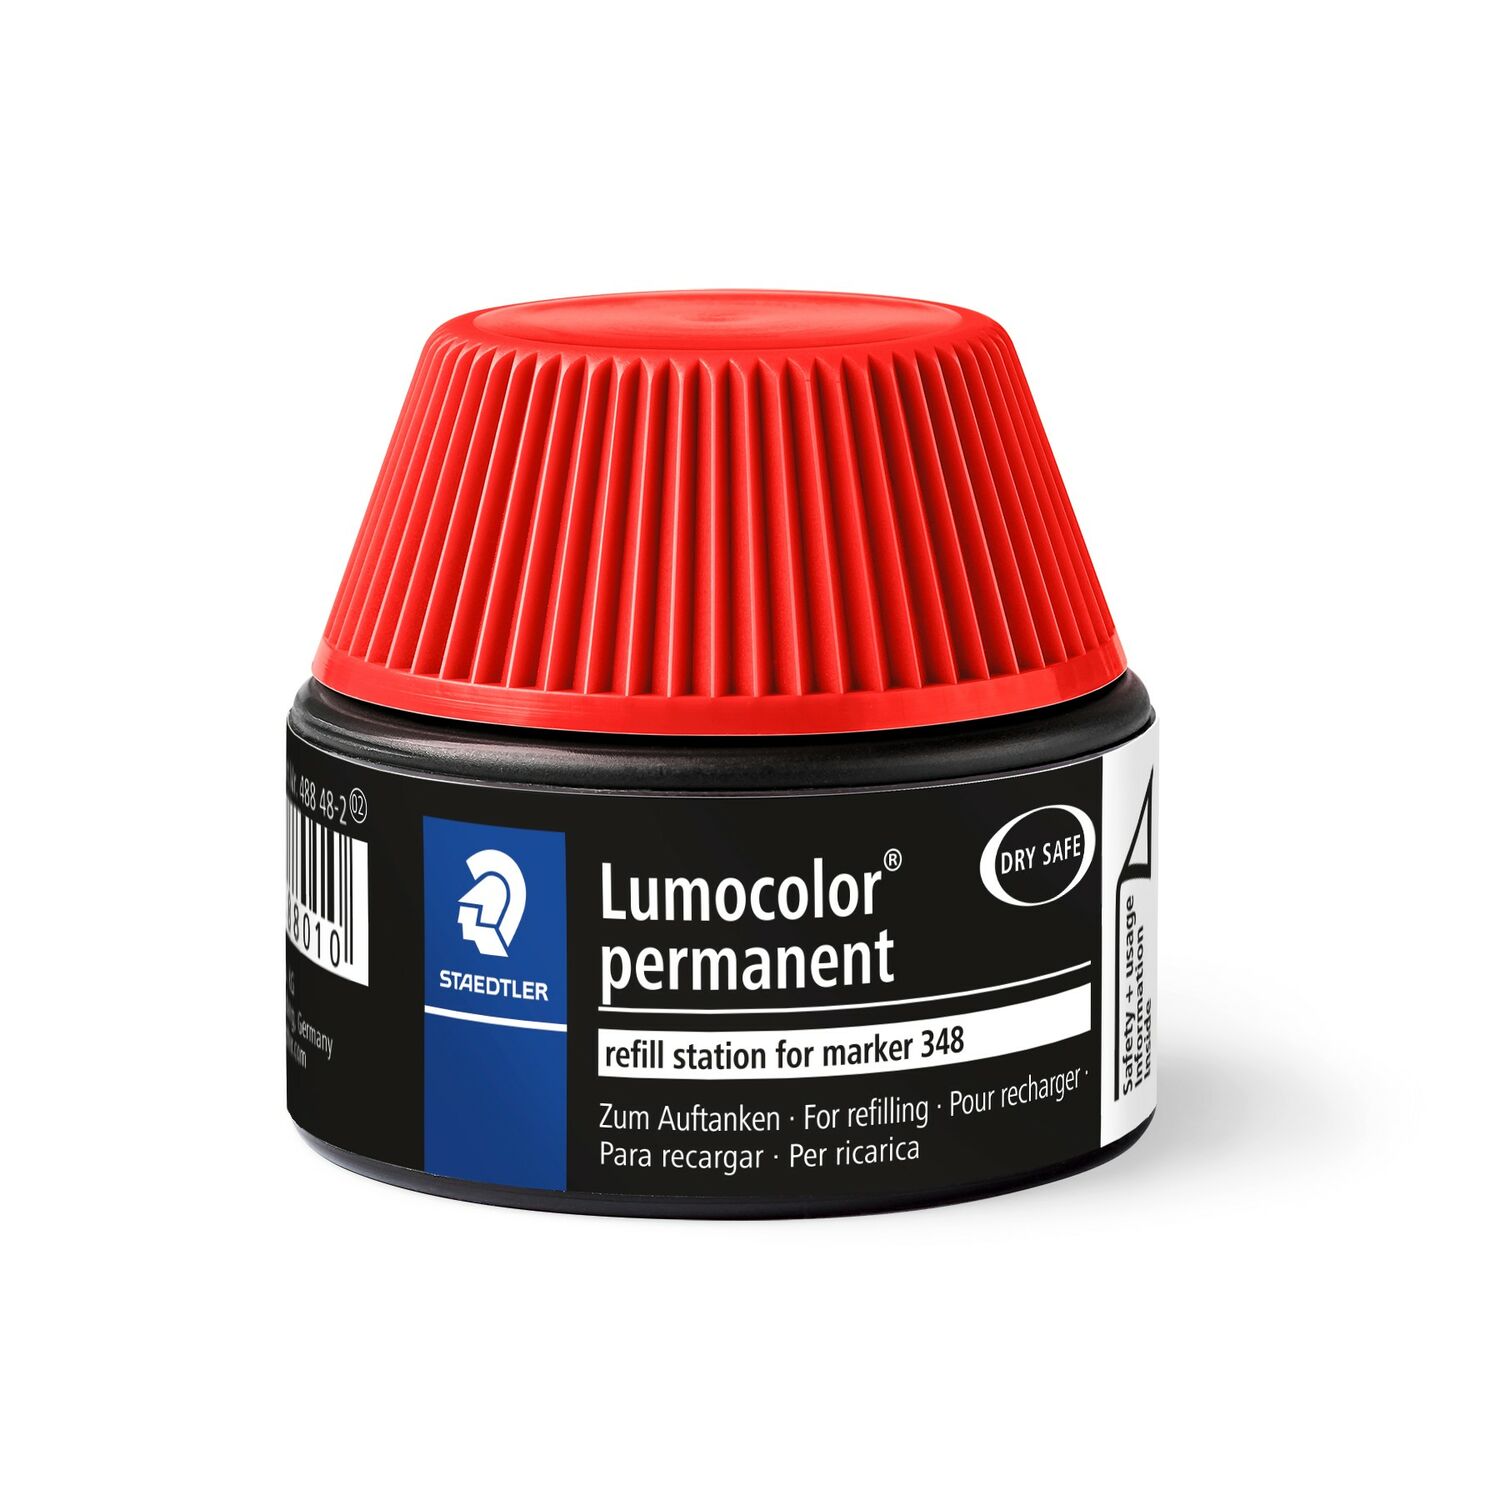 Lumocolor® permanent marker refill station 488 48 - Recharge pour Lumocolor permanent compact 342 et Lumocolor permanent duo 348